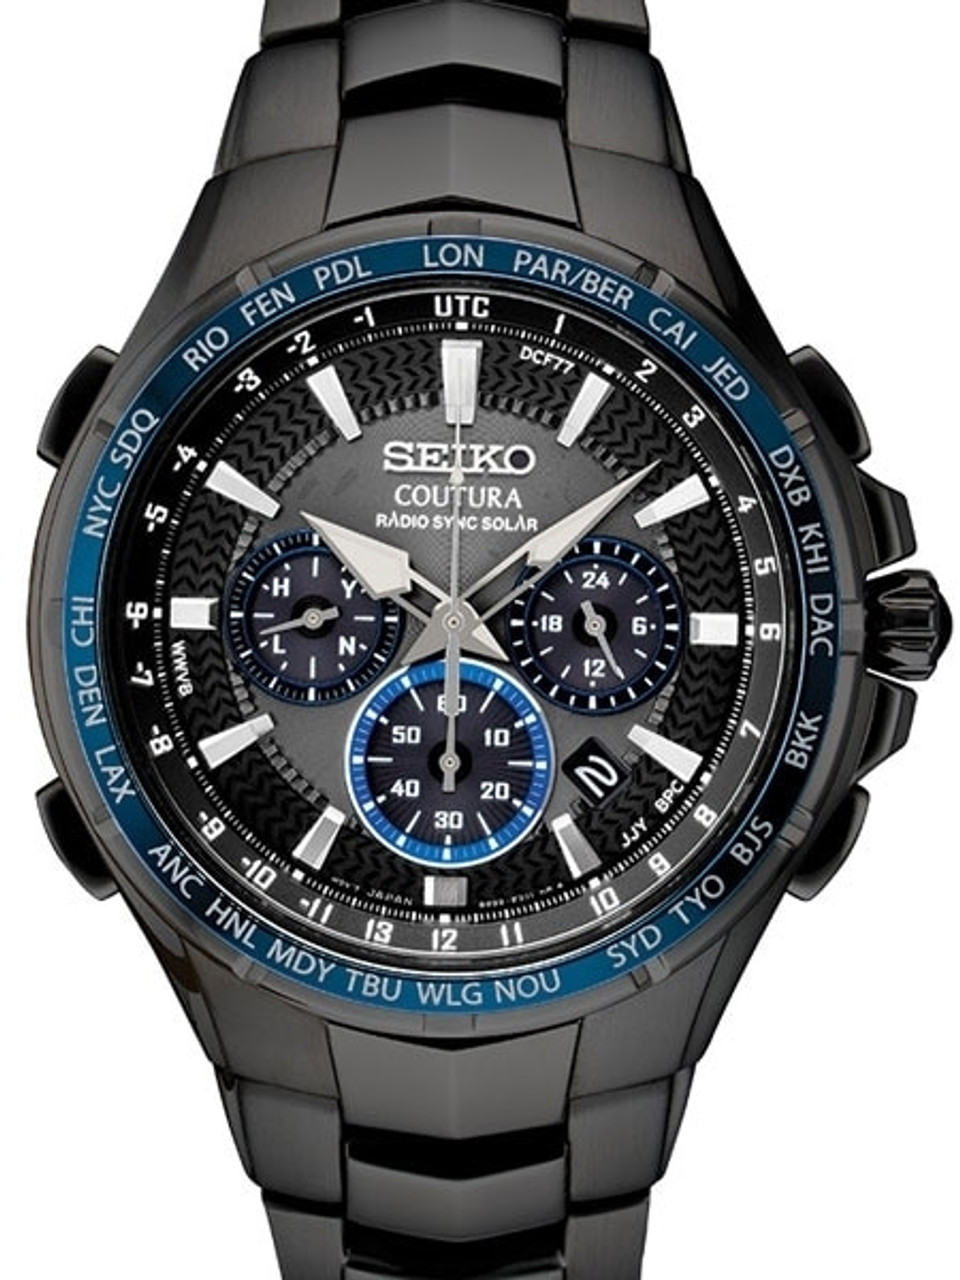 Seiko Coutura Radio Sync, Solar Powered, Chronograph, World Time Watch with  Sapphire Crystal #SSG021